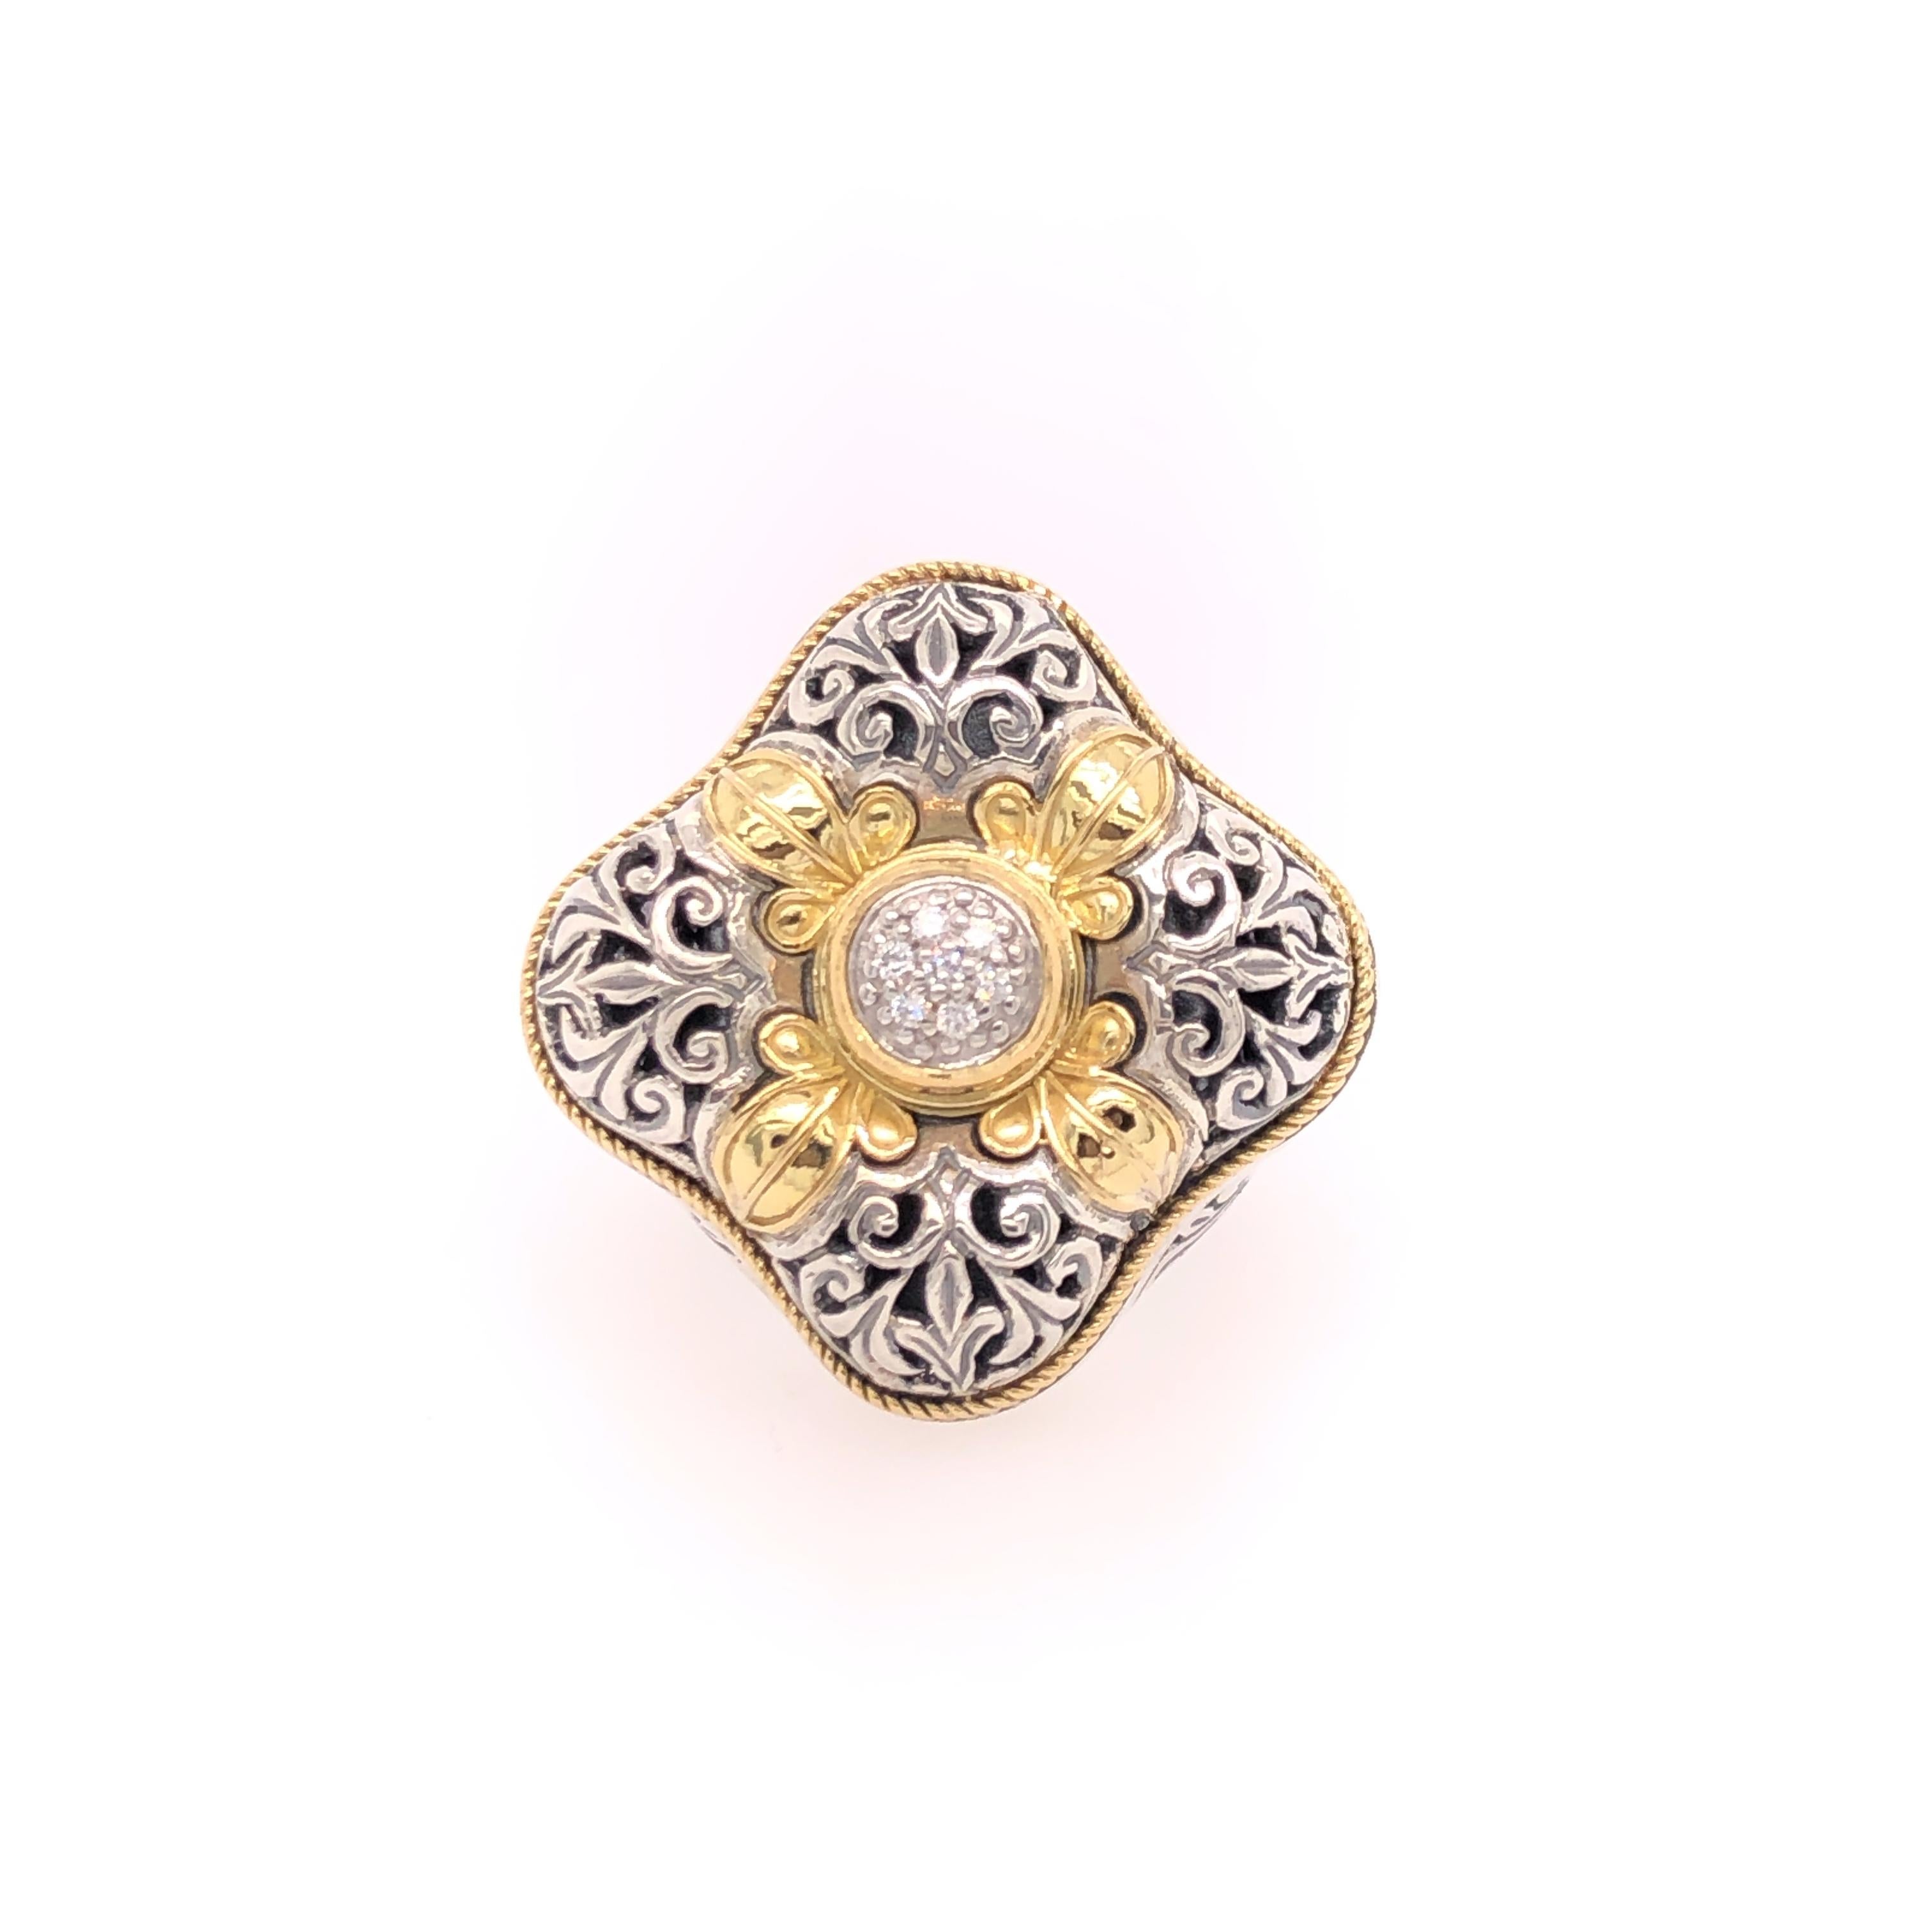 Gemstone: Diamond (0.09ct +/- )
Material: Sterling Silver & 18k Gold

Size: 7

Stamped: 750, 925, KONSTANTINO
